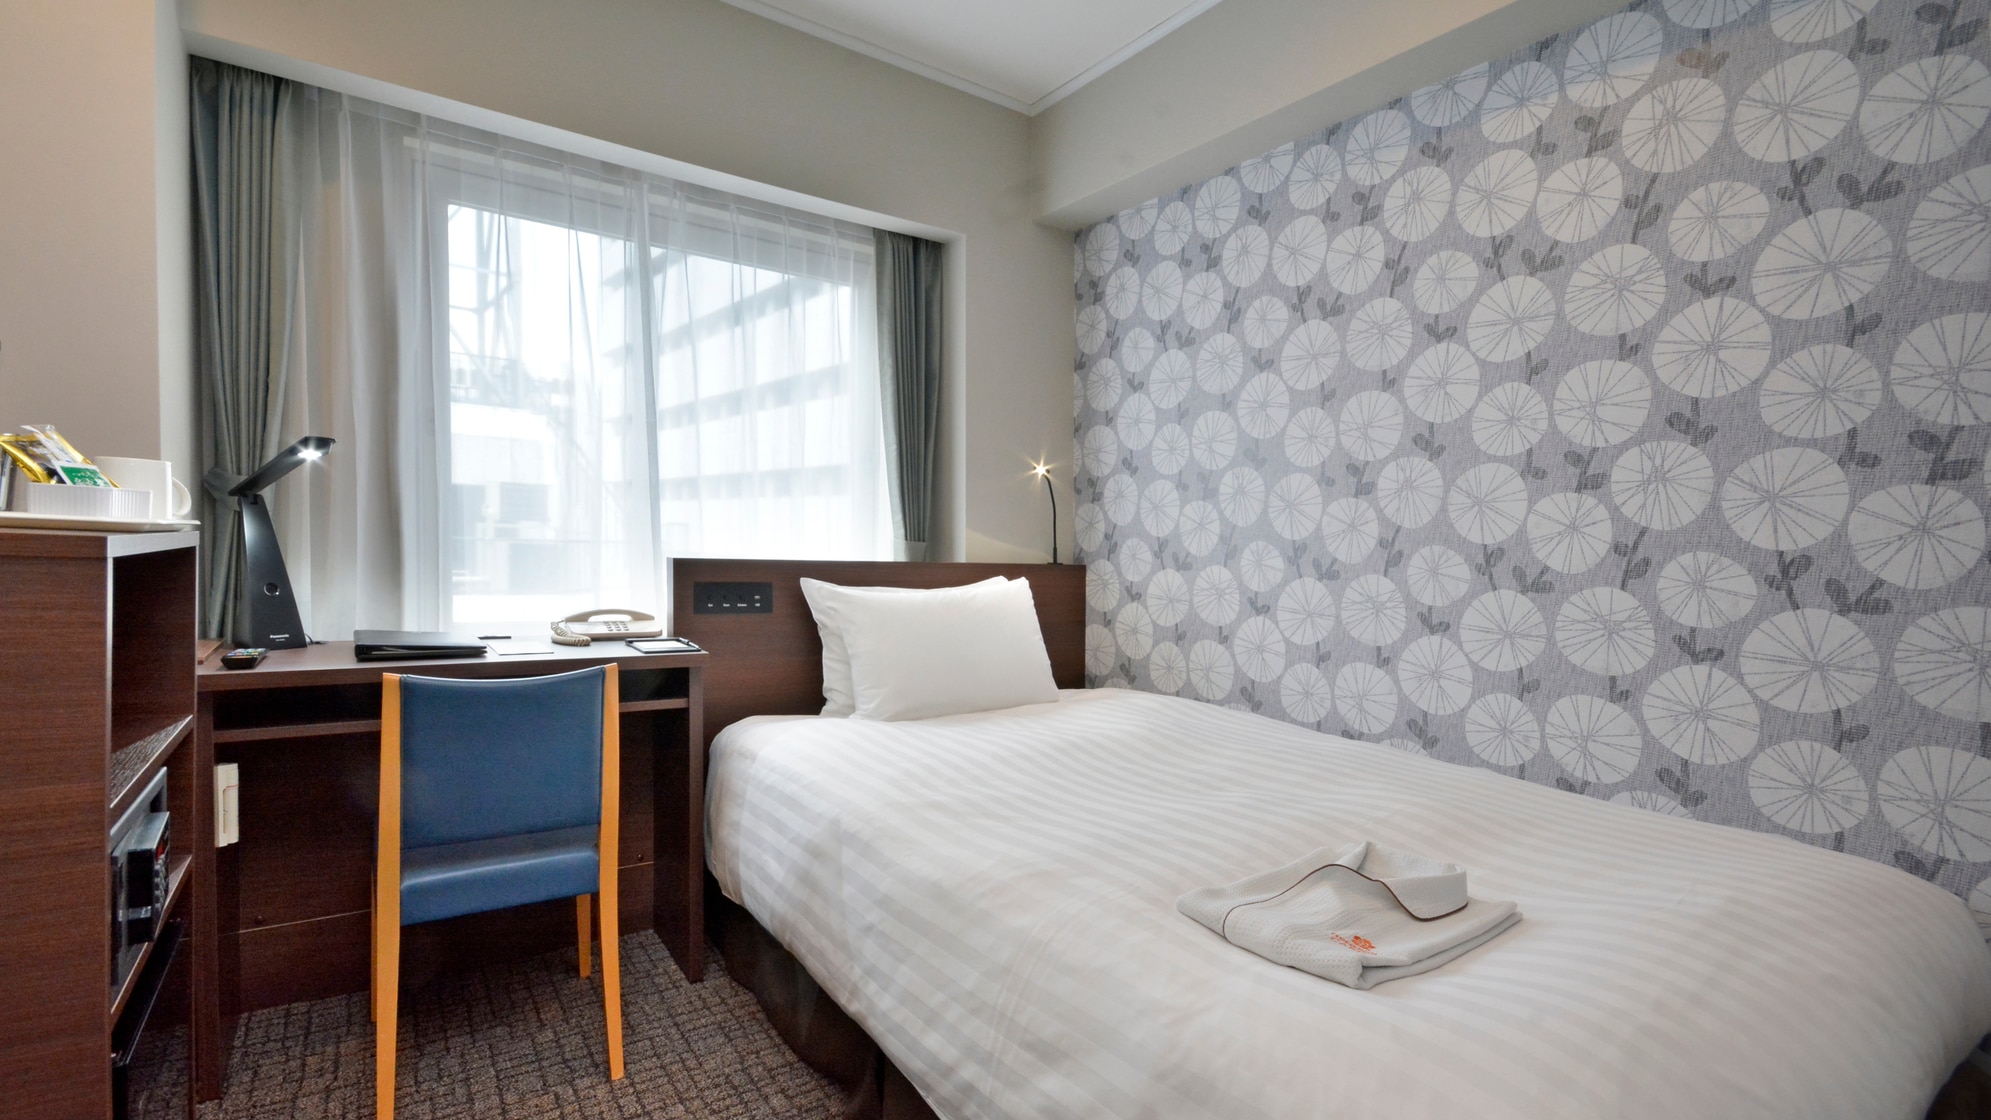 ★ All guest rooms renewed in July 2019 ★ [Non-smoking] Single room